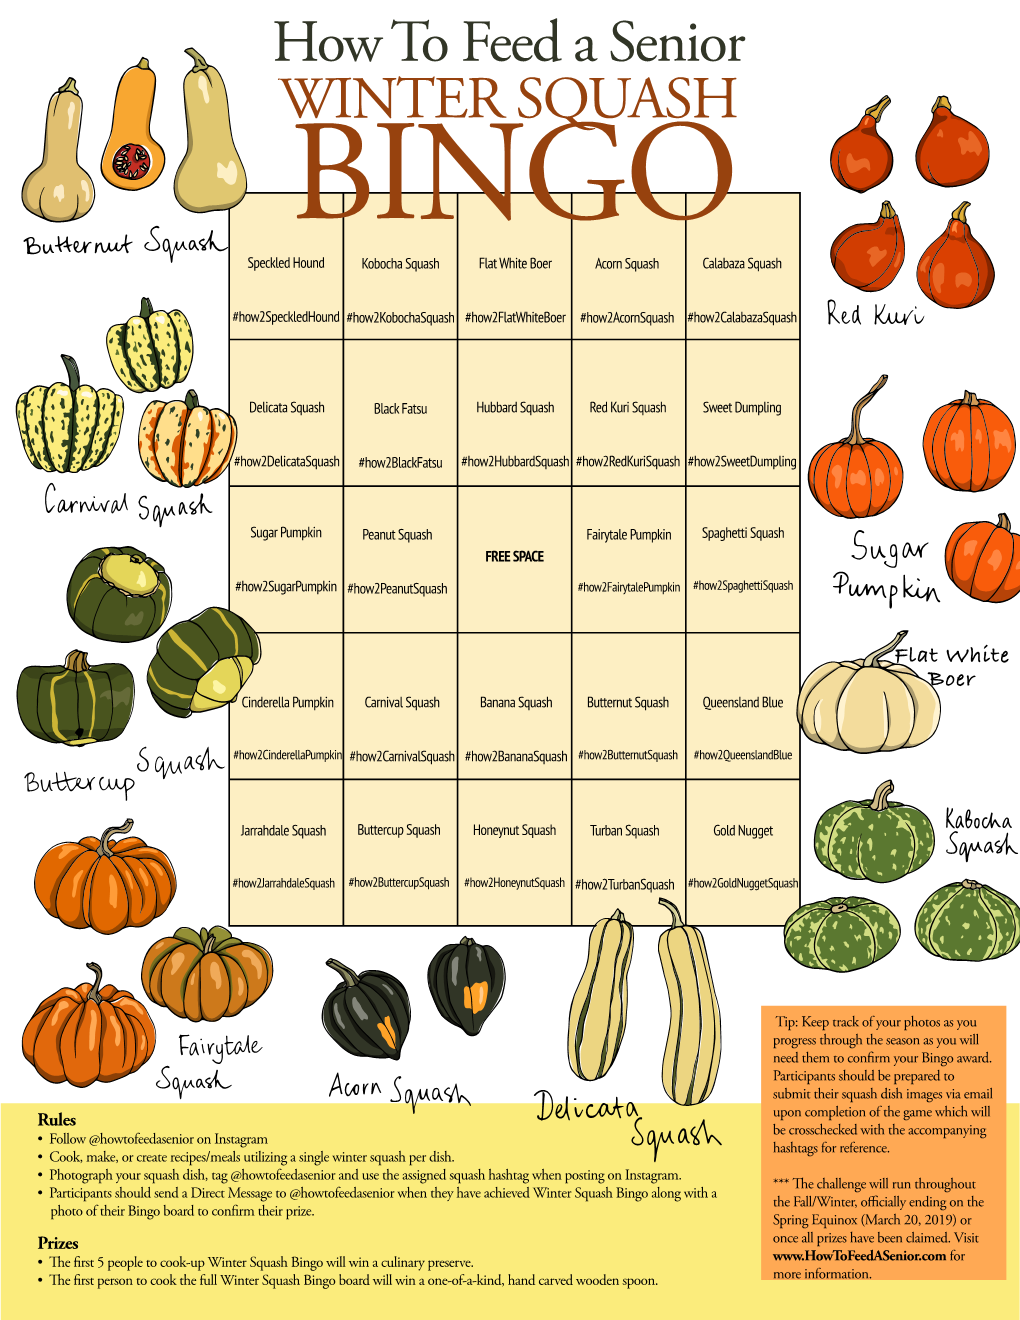 Winter Squash Bingo Board Will Win a One-Of-A-Kind, Hand Carved Wooden Spoon